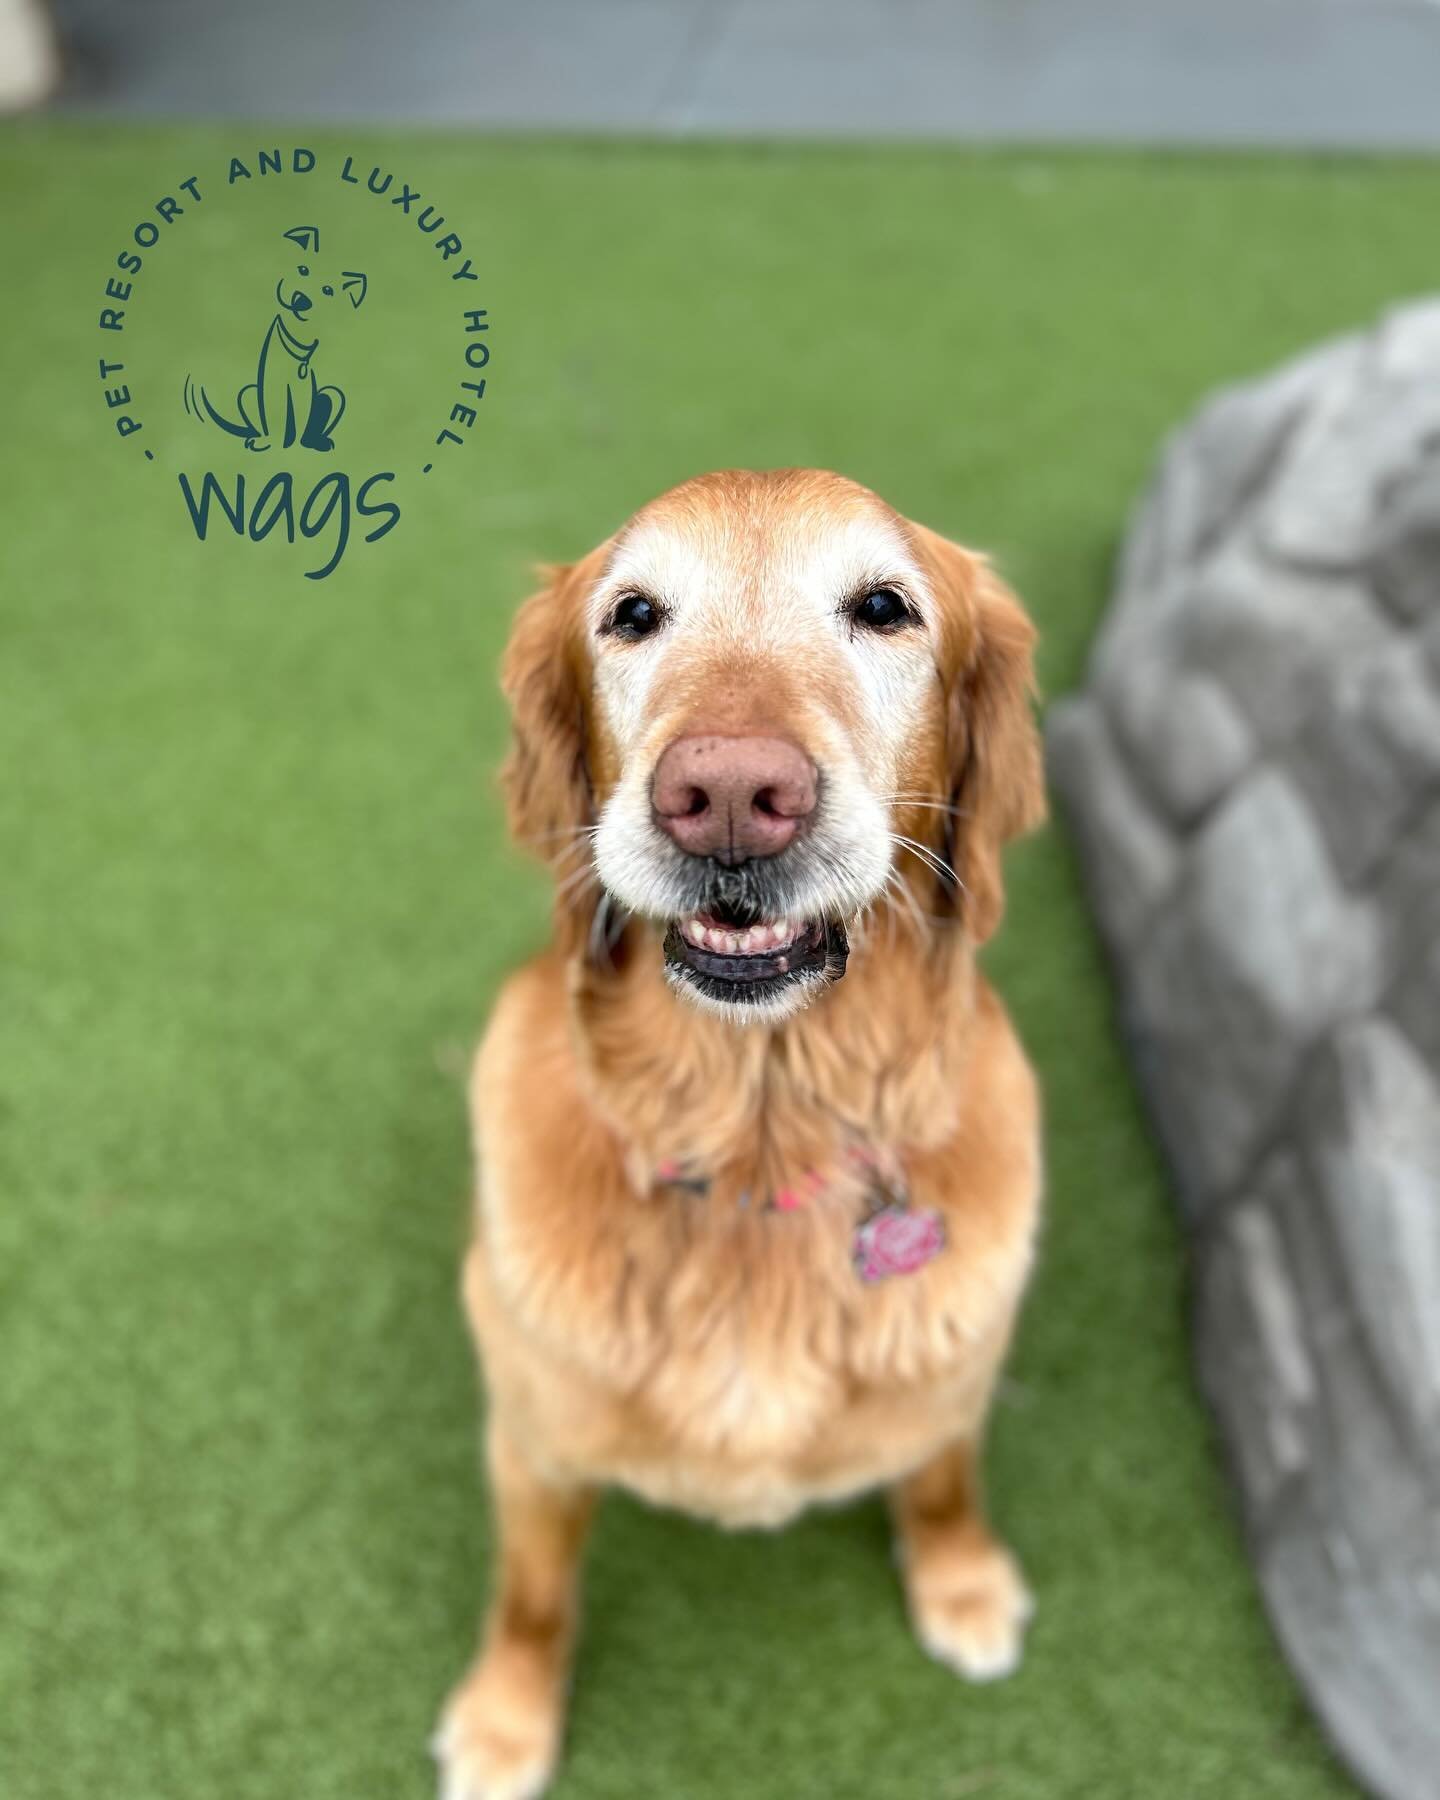 Meet the wags crew: Riley is one of the sweetest golden retrievers you&rsquo;ll ever meet! She will do just about anything for a treat, and loves to sun bathe! ☀️😎